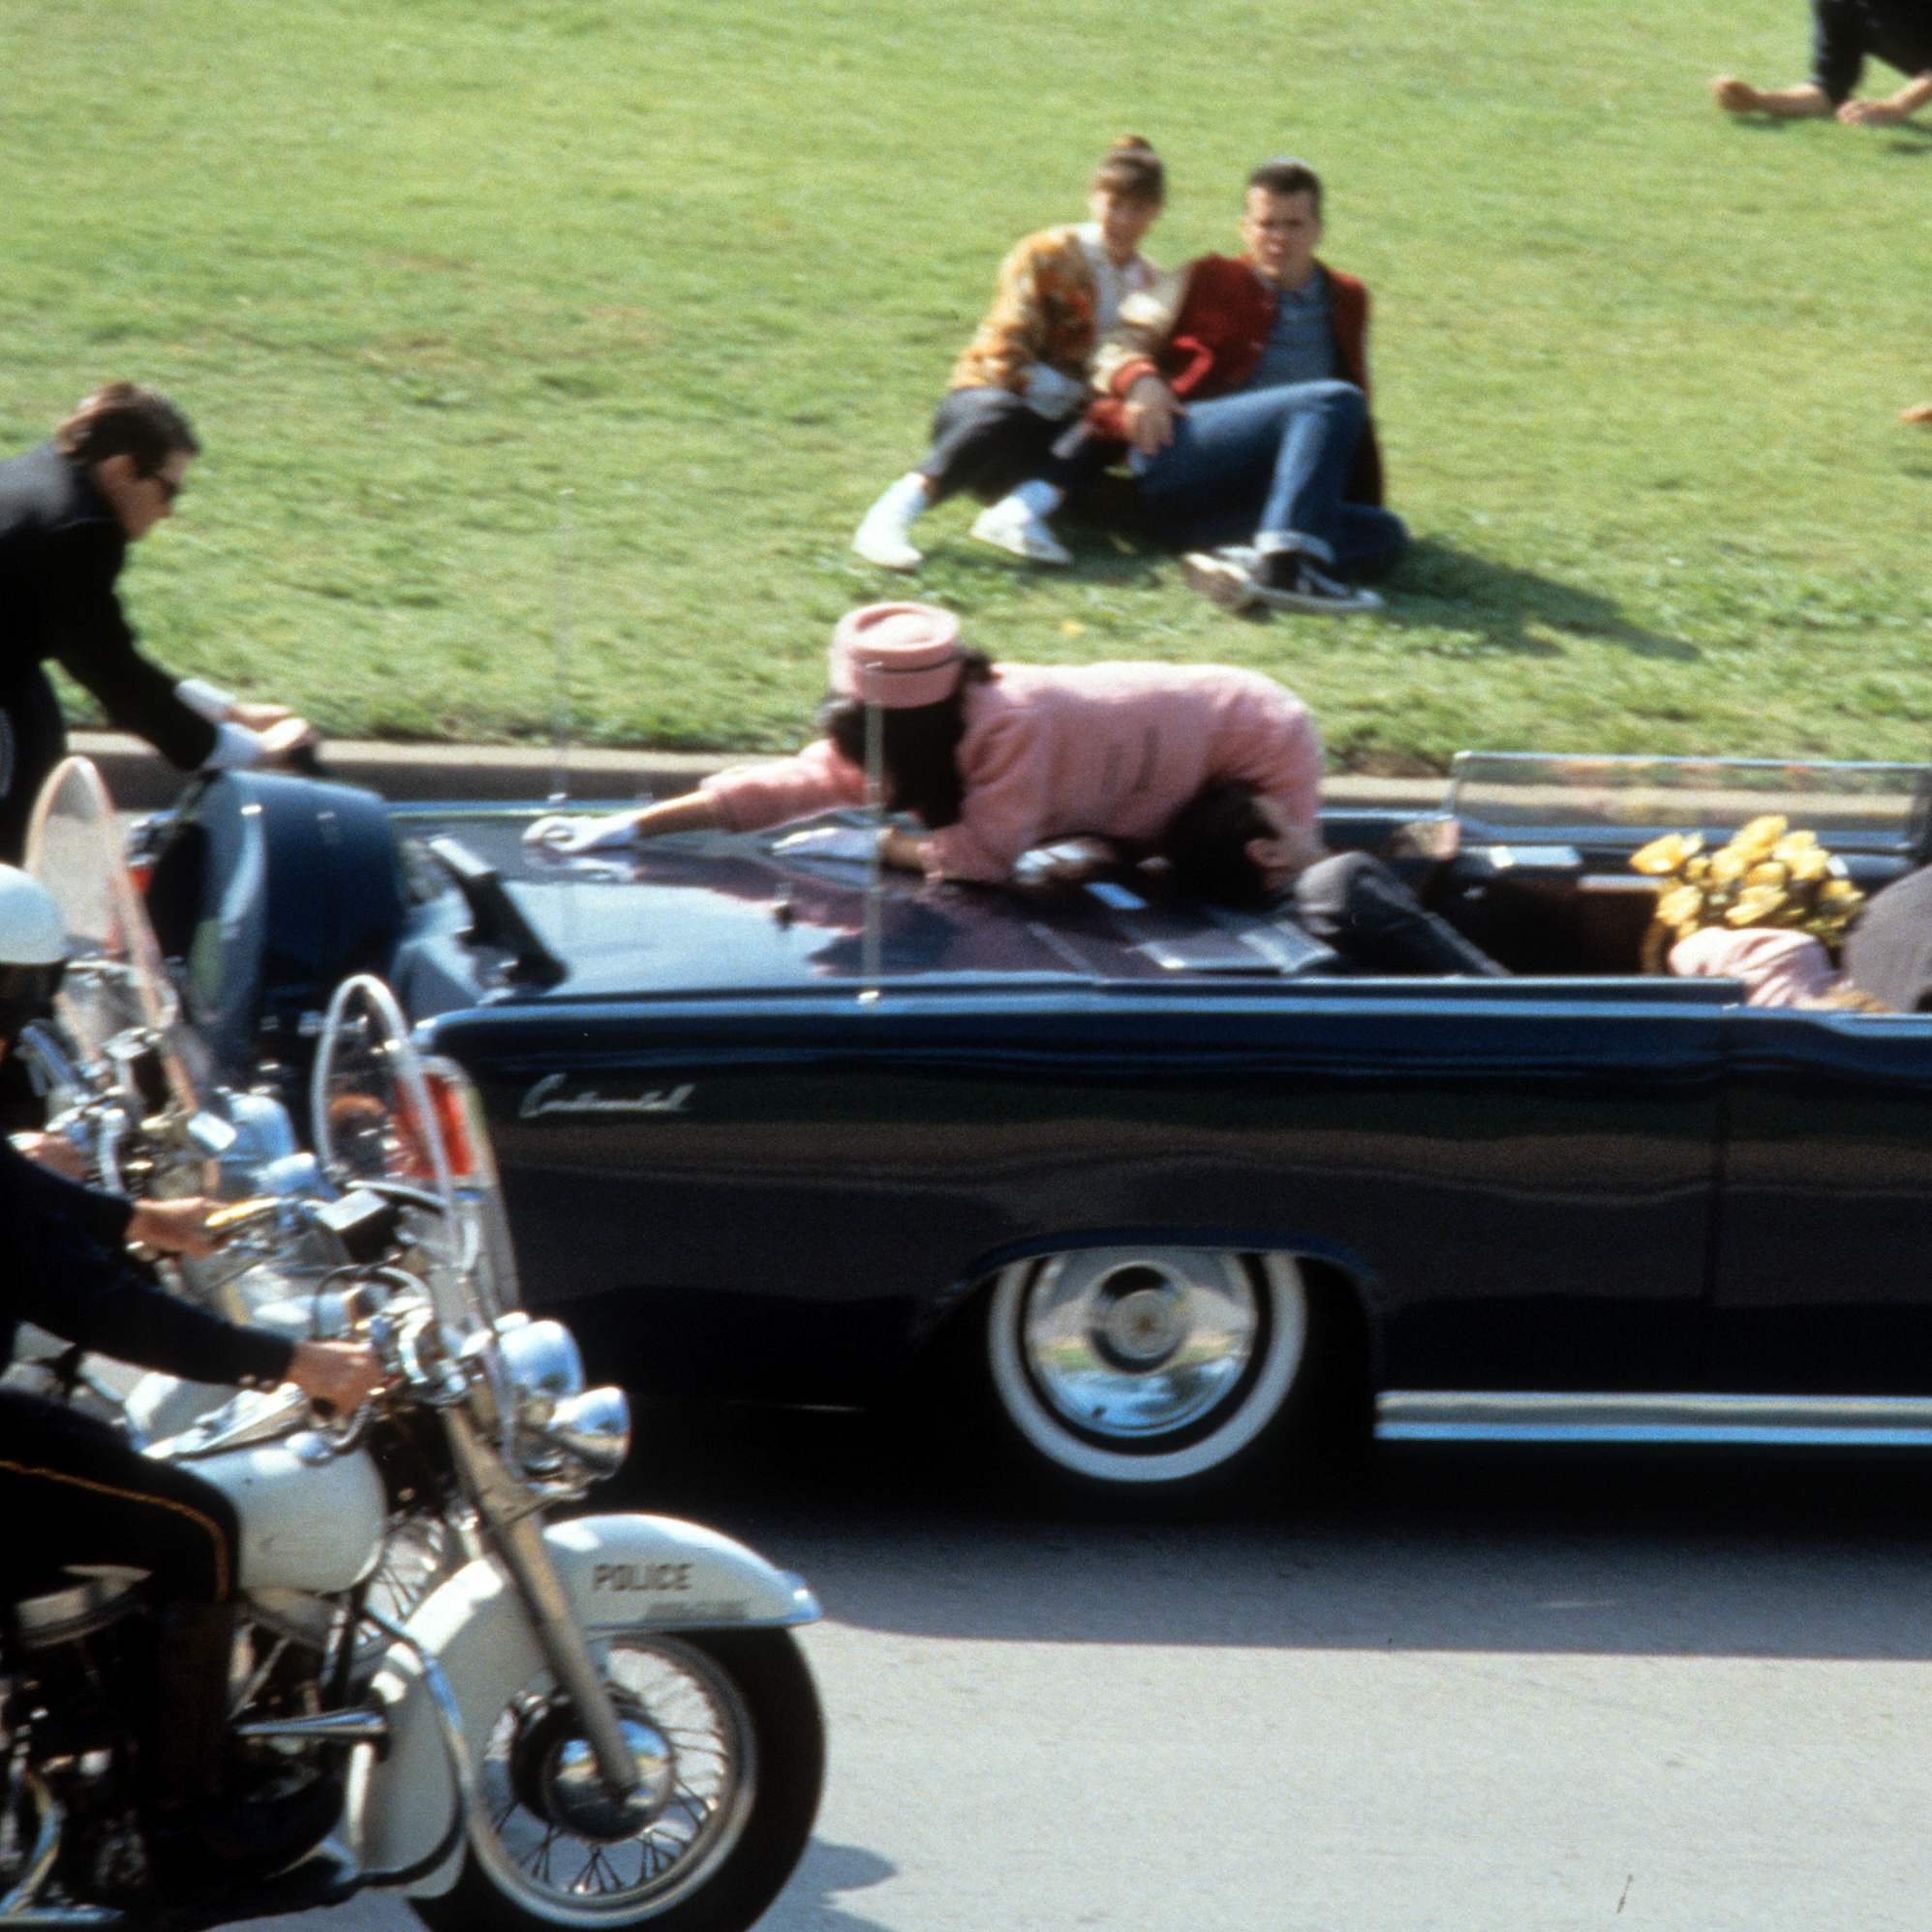 ‘Though the heavens fall’: The JFK assassination in our media and culture